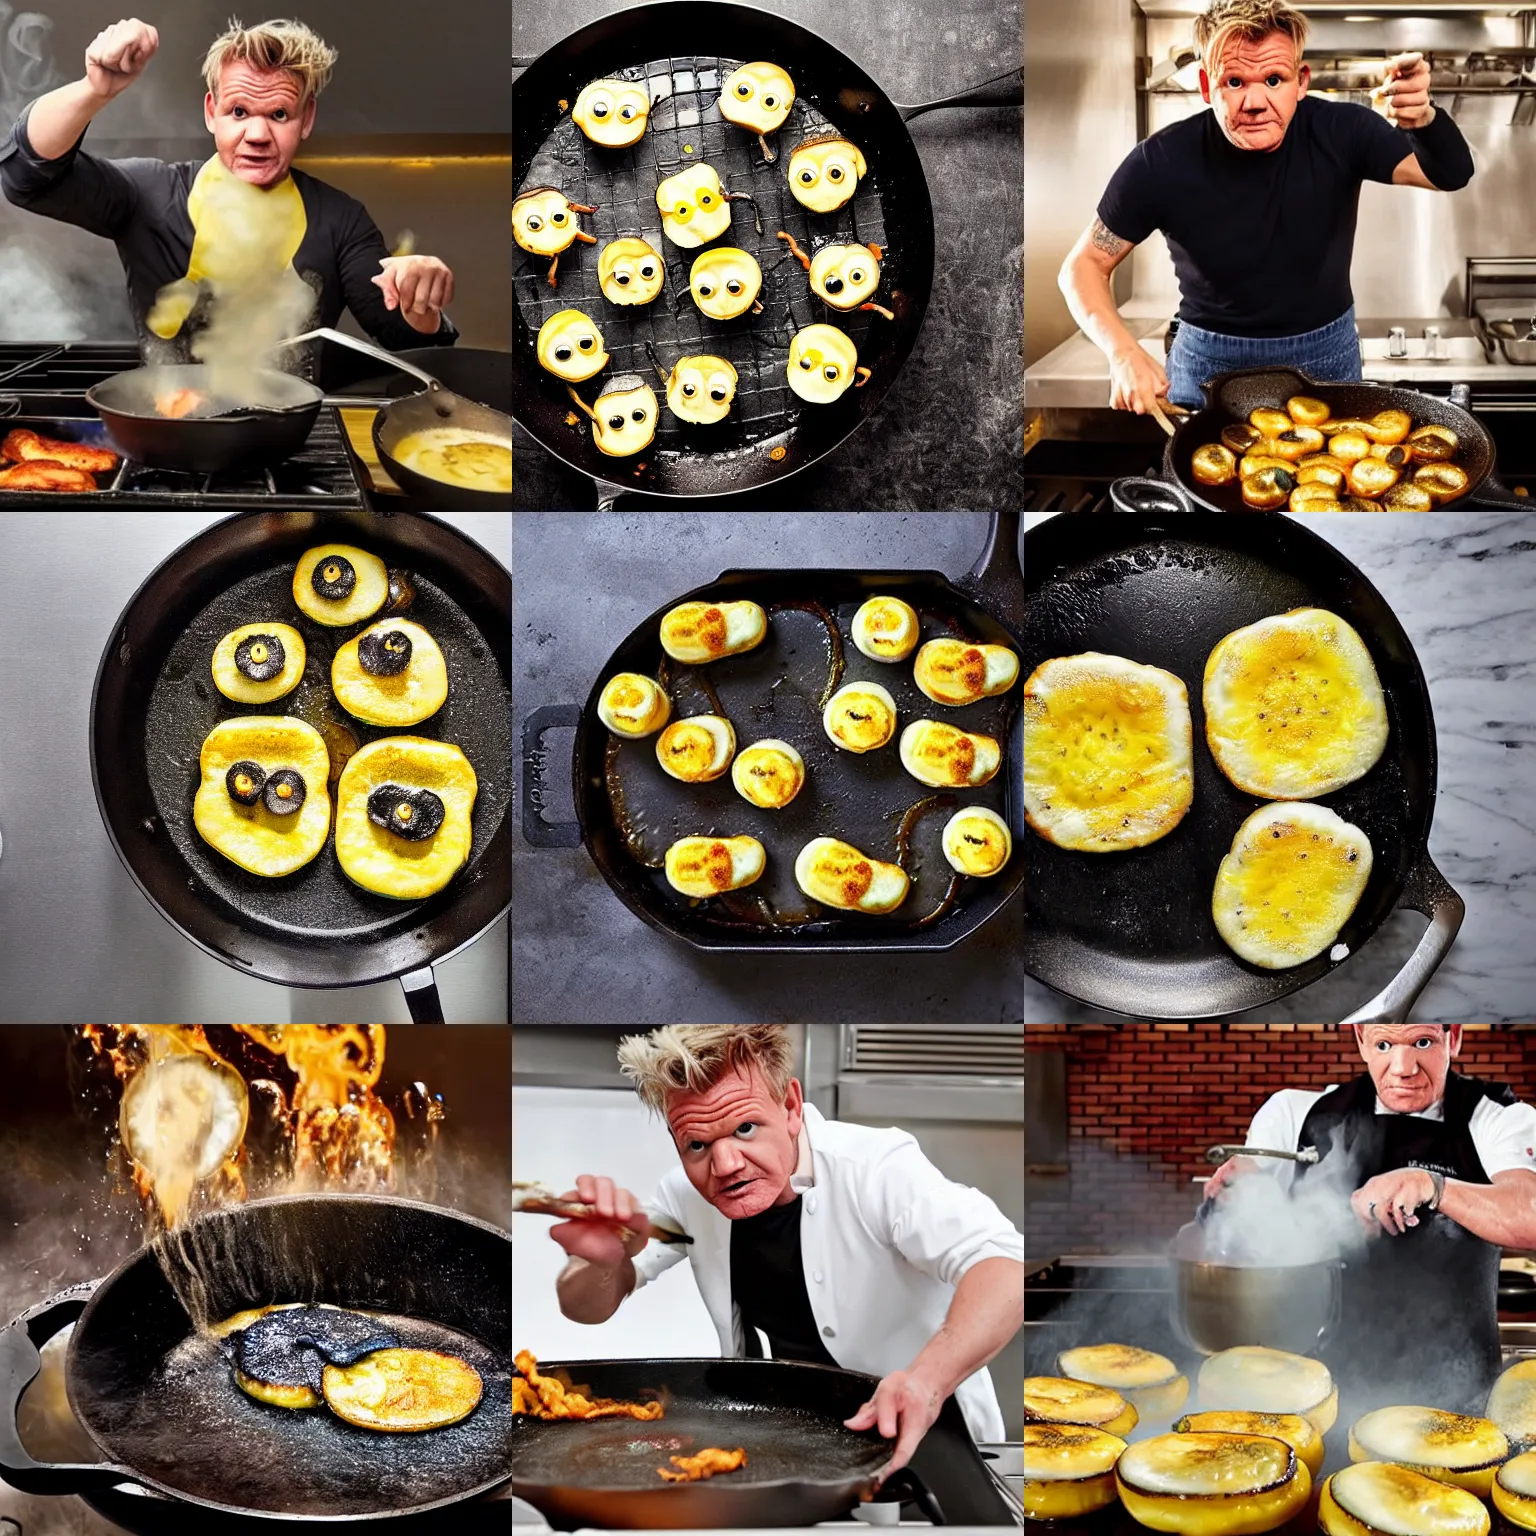 Gordon Ramsay frying minions on a pan, Stable Diffusion